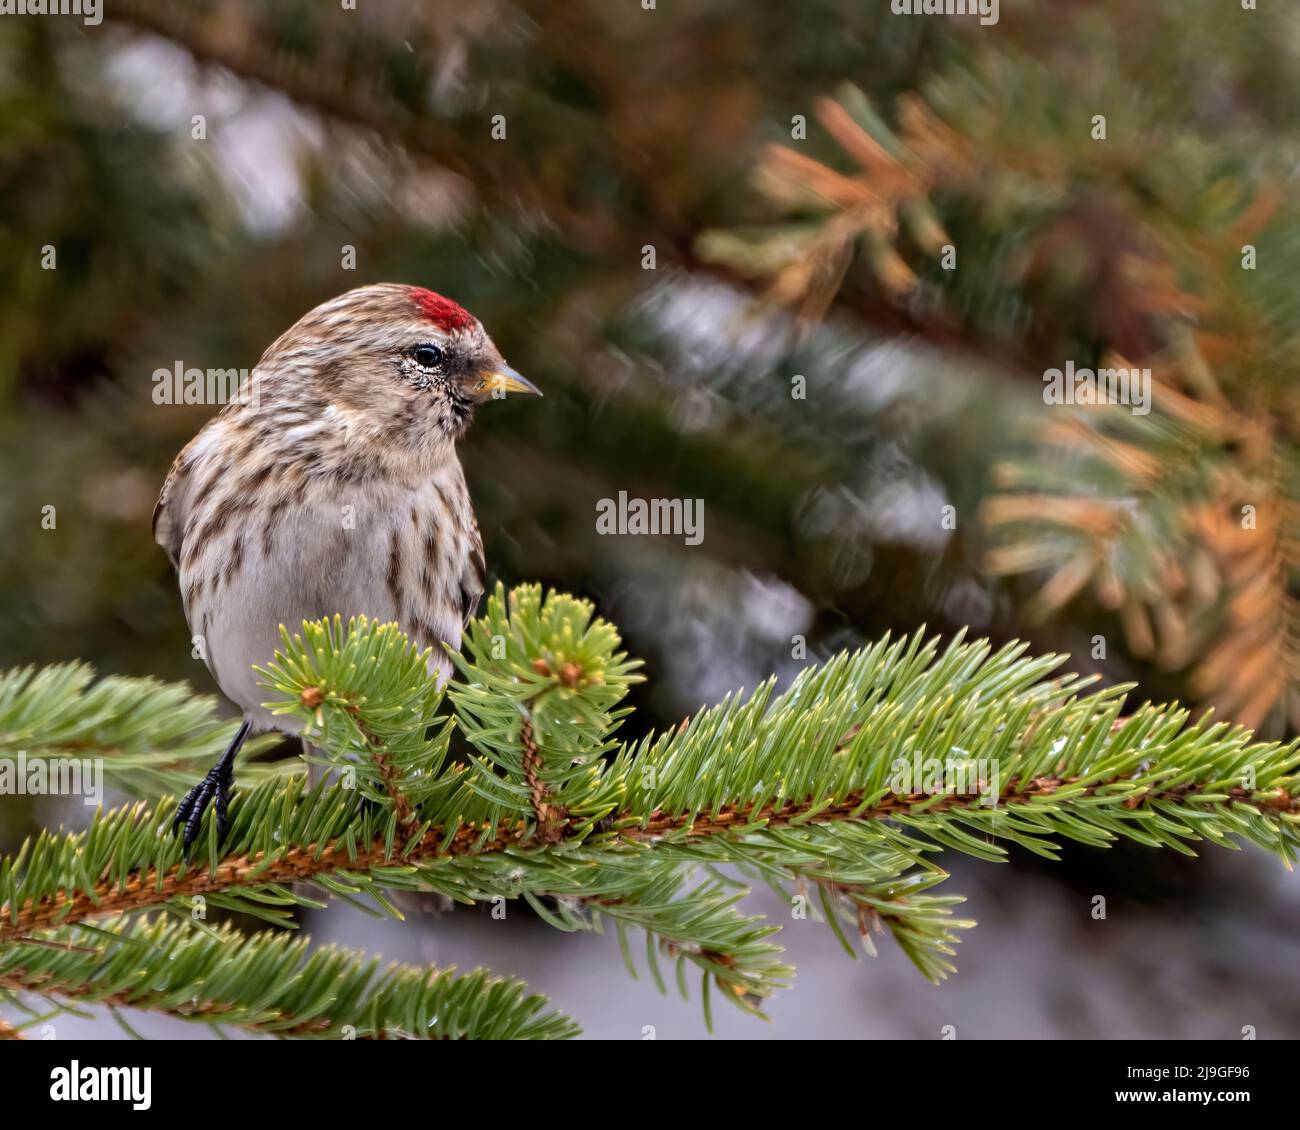 Red poll close-up profile view, perched on a pine branch with blur forest background in its environment and habitat surrounding Stock Photo